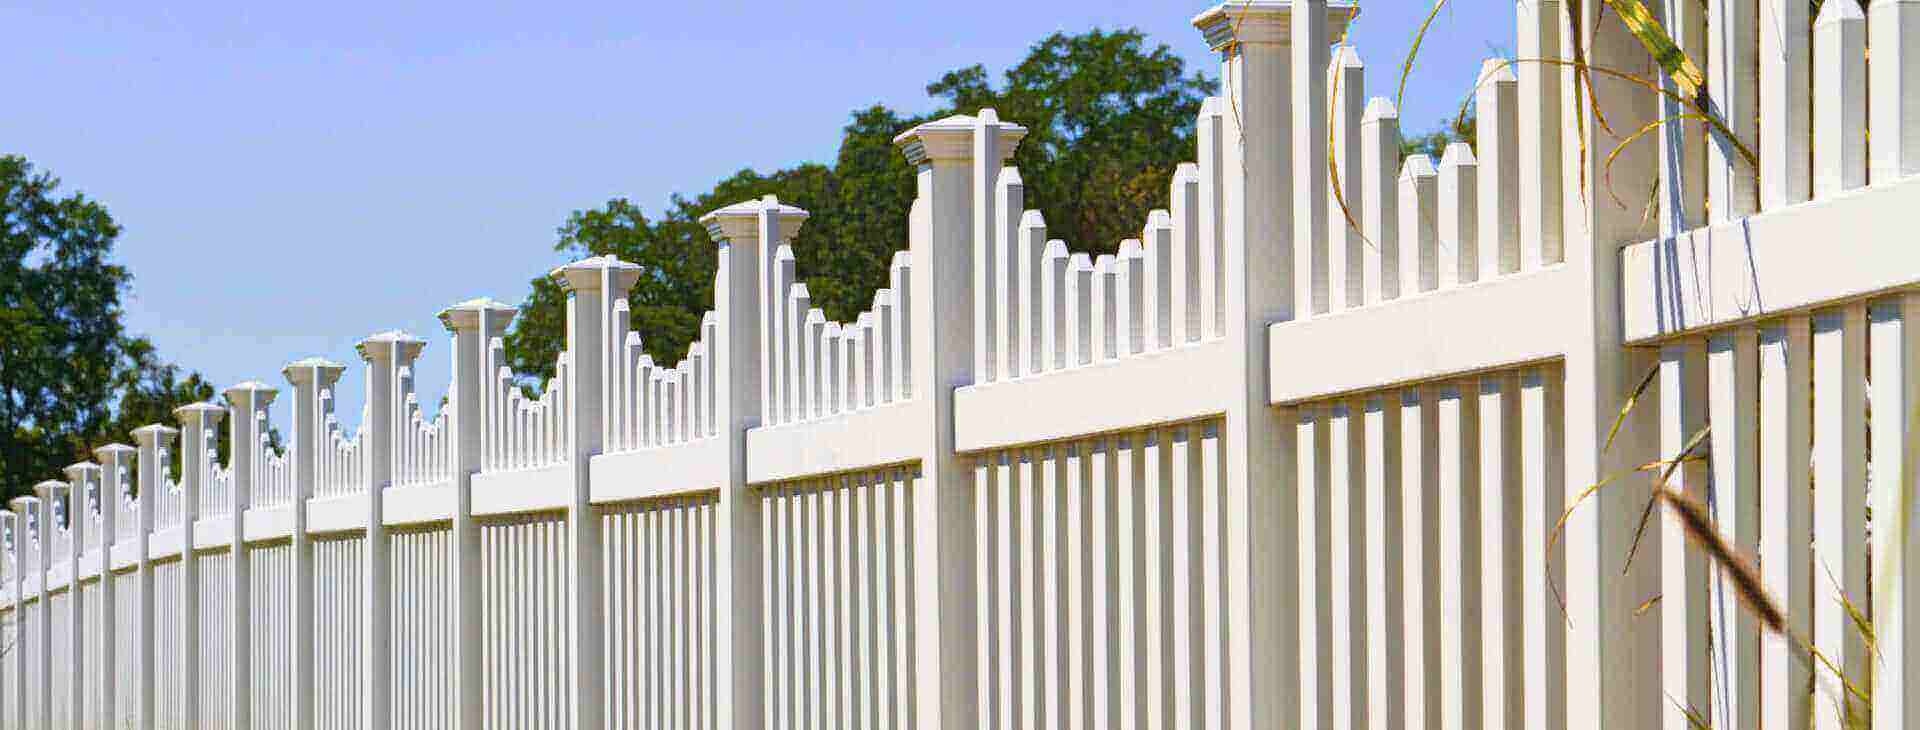 We've provided fencing services since 2012